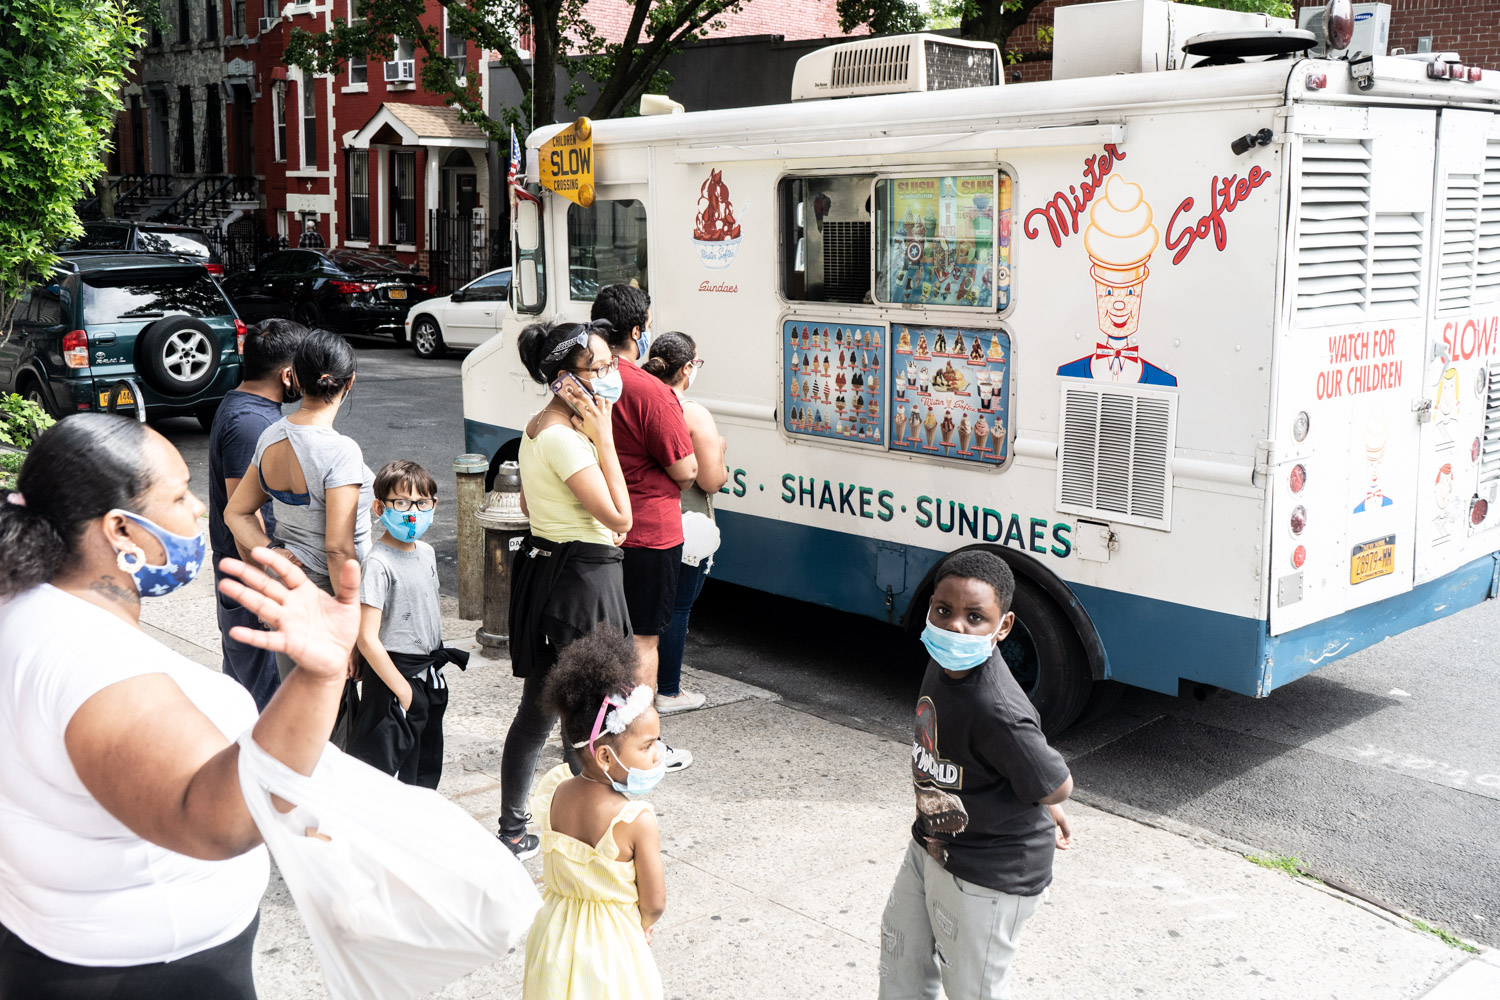 May 27, 2020: Lining up for ice cream at East 140th Street and Willis Avenue, Bronx, New York. © Camilo José Vergara